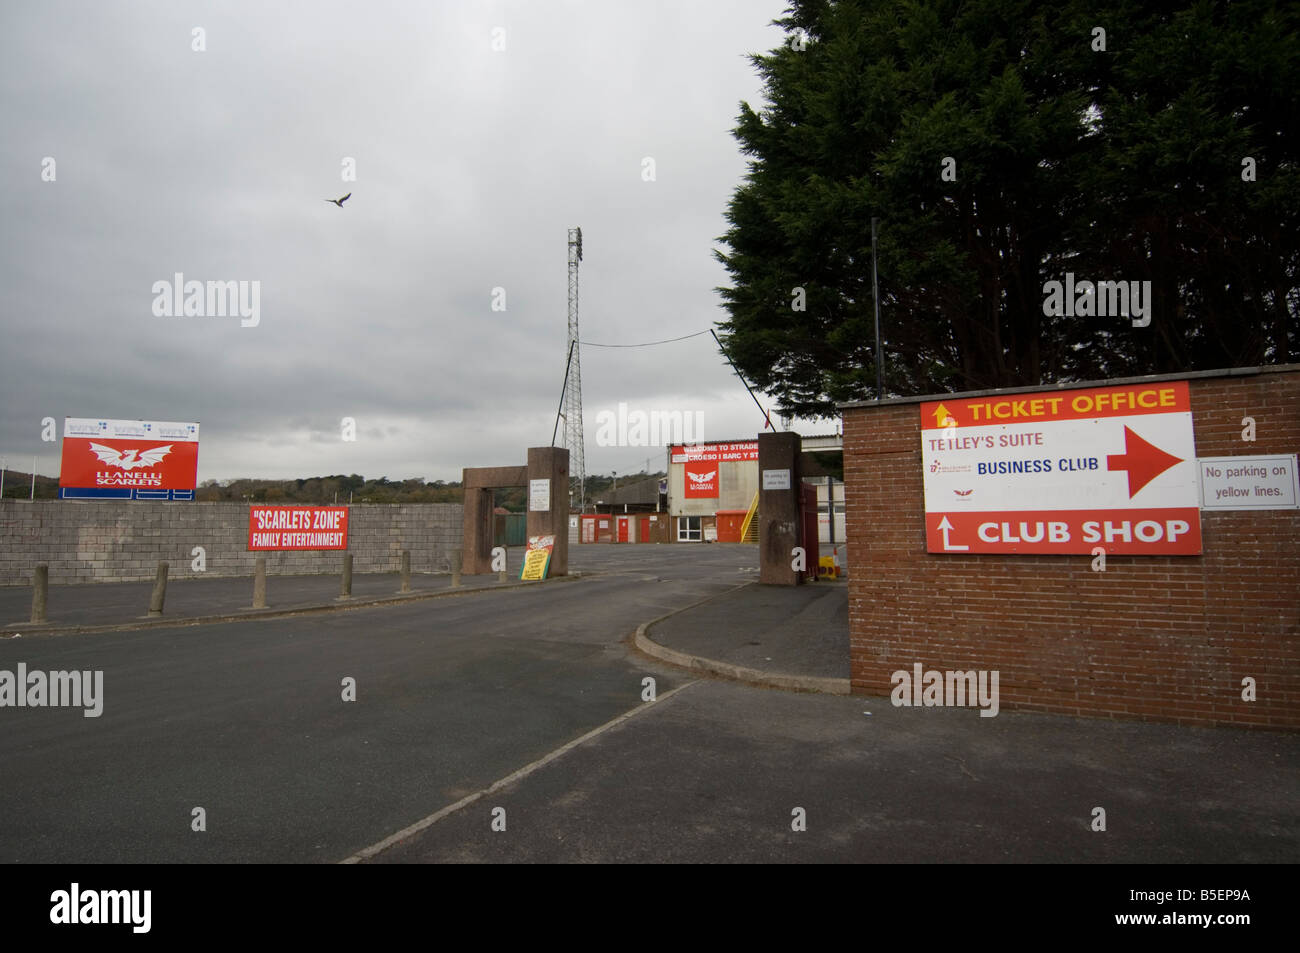 Stradey Park rugby ground in Llanelli, the former ground of Llanelli RFC and The Scarlets. Stock Photo